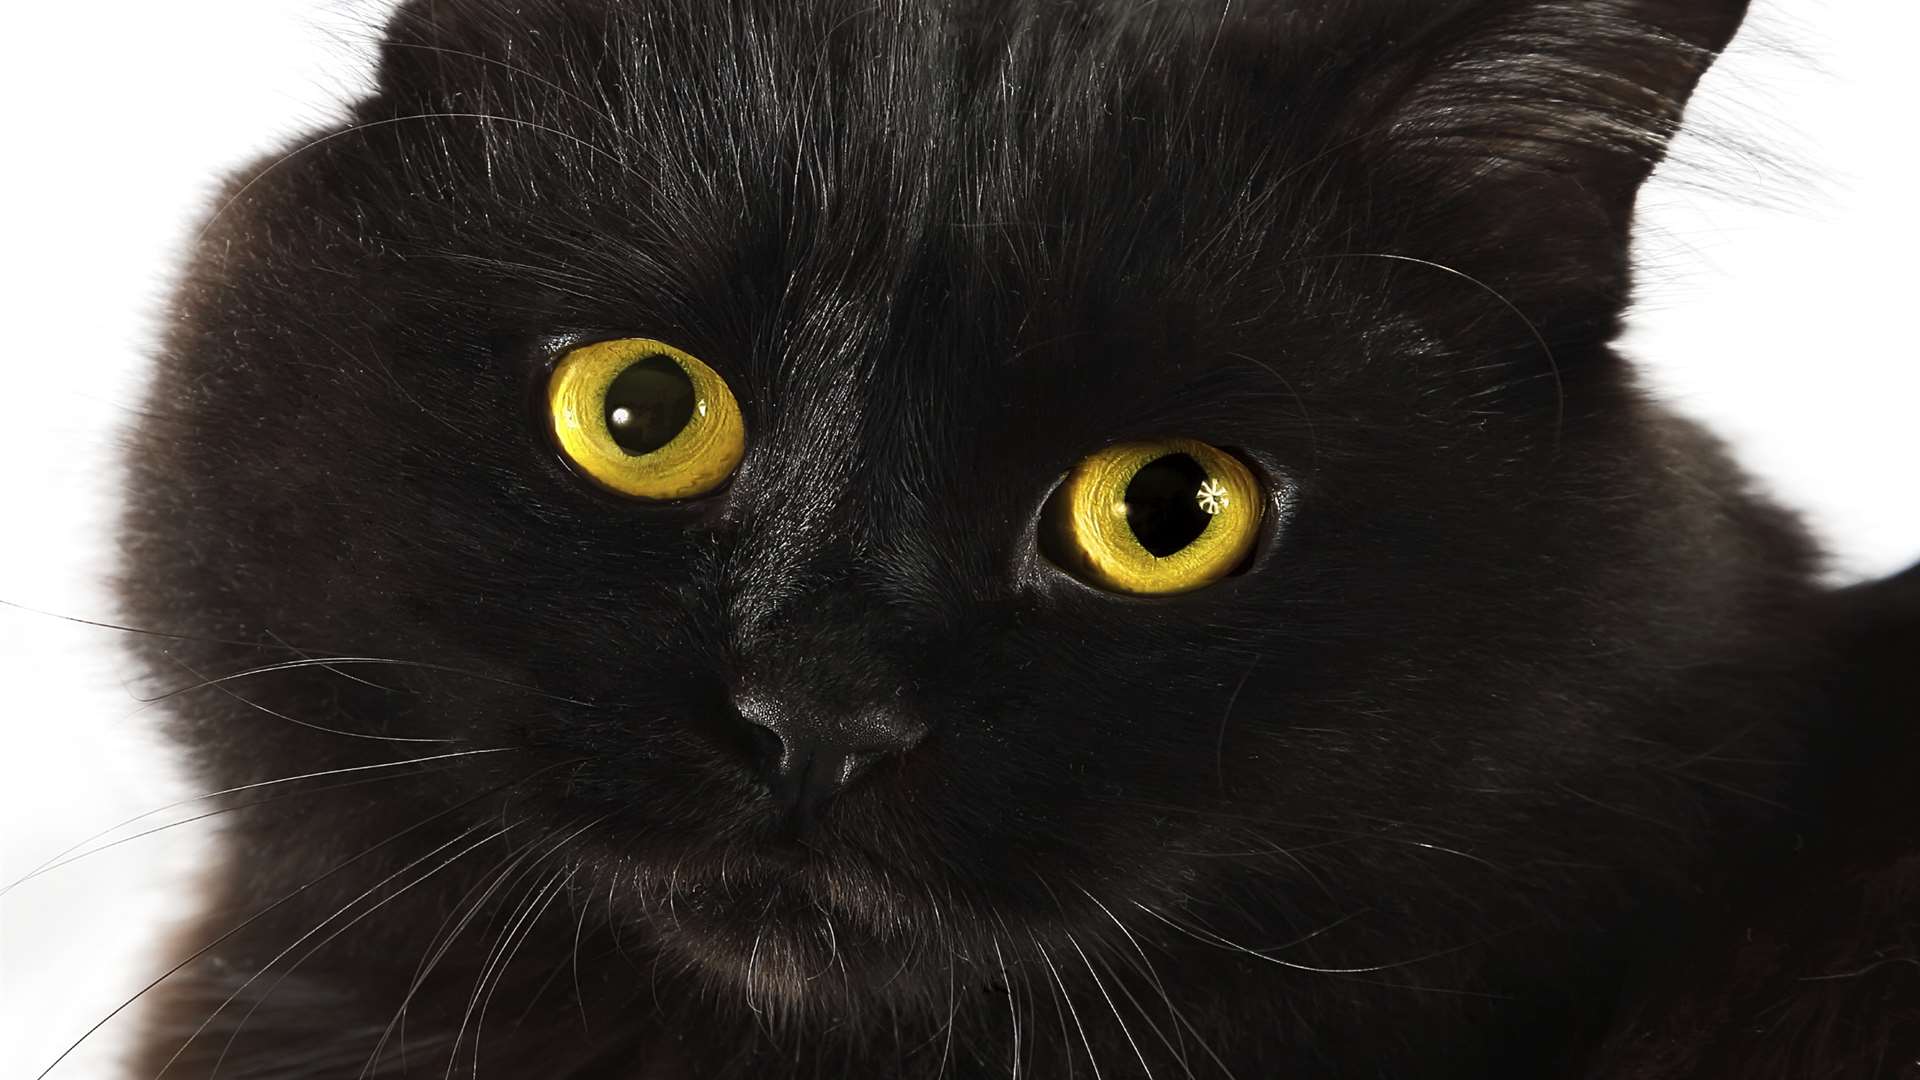 The Tunbridge Wells & Maidstone RSPCA has issued an urgent appeal to the public because it is bursting with beautiful black cats begging for a forever home